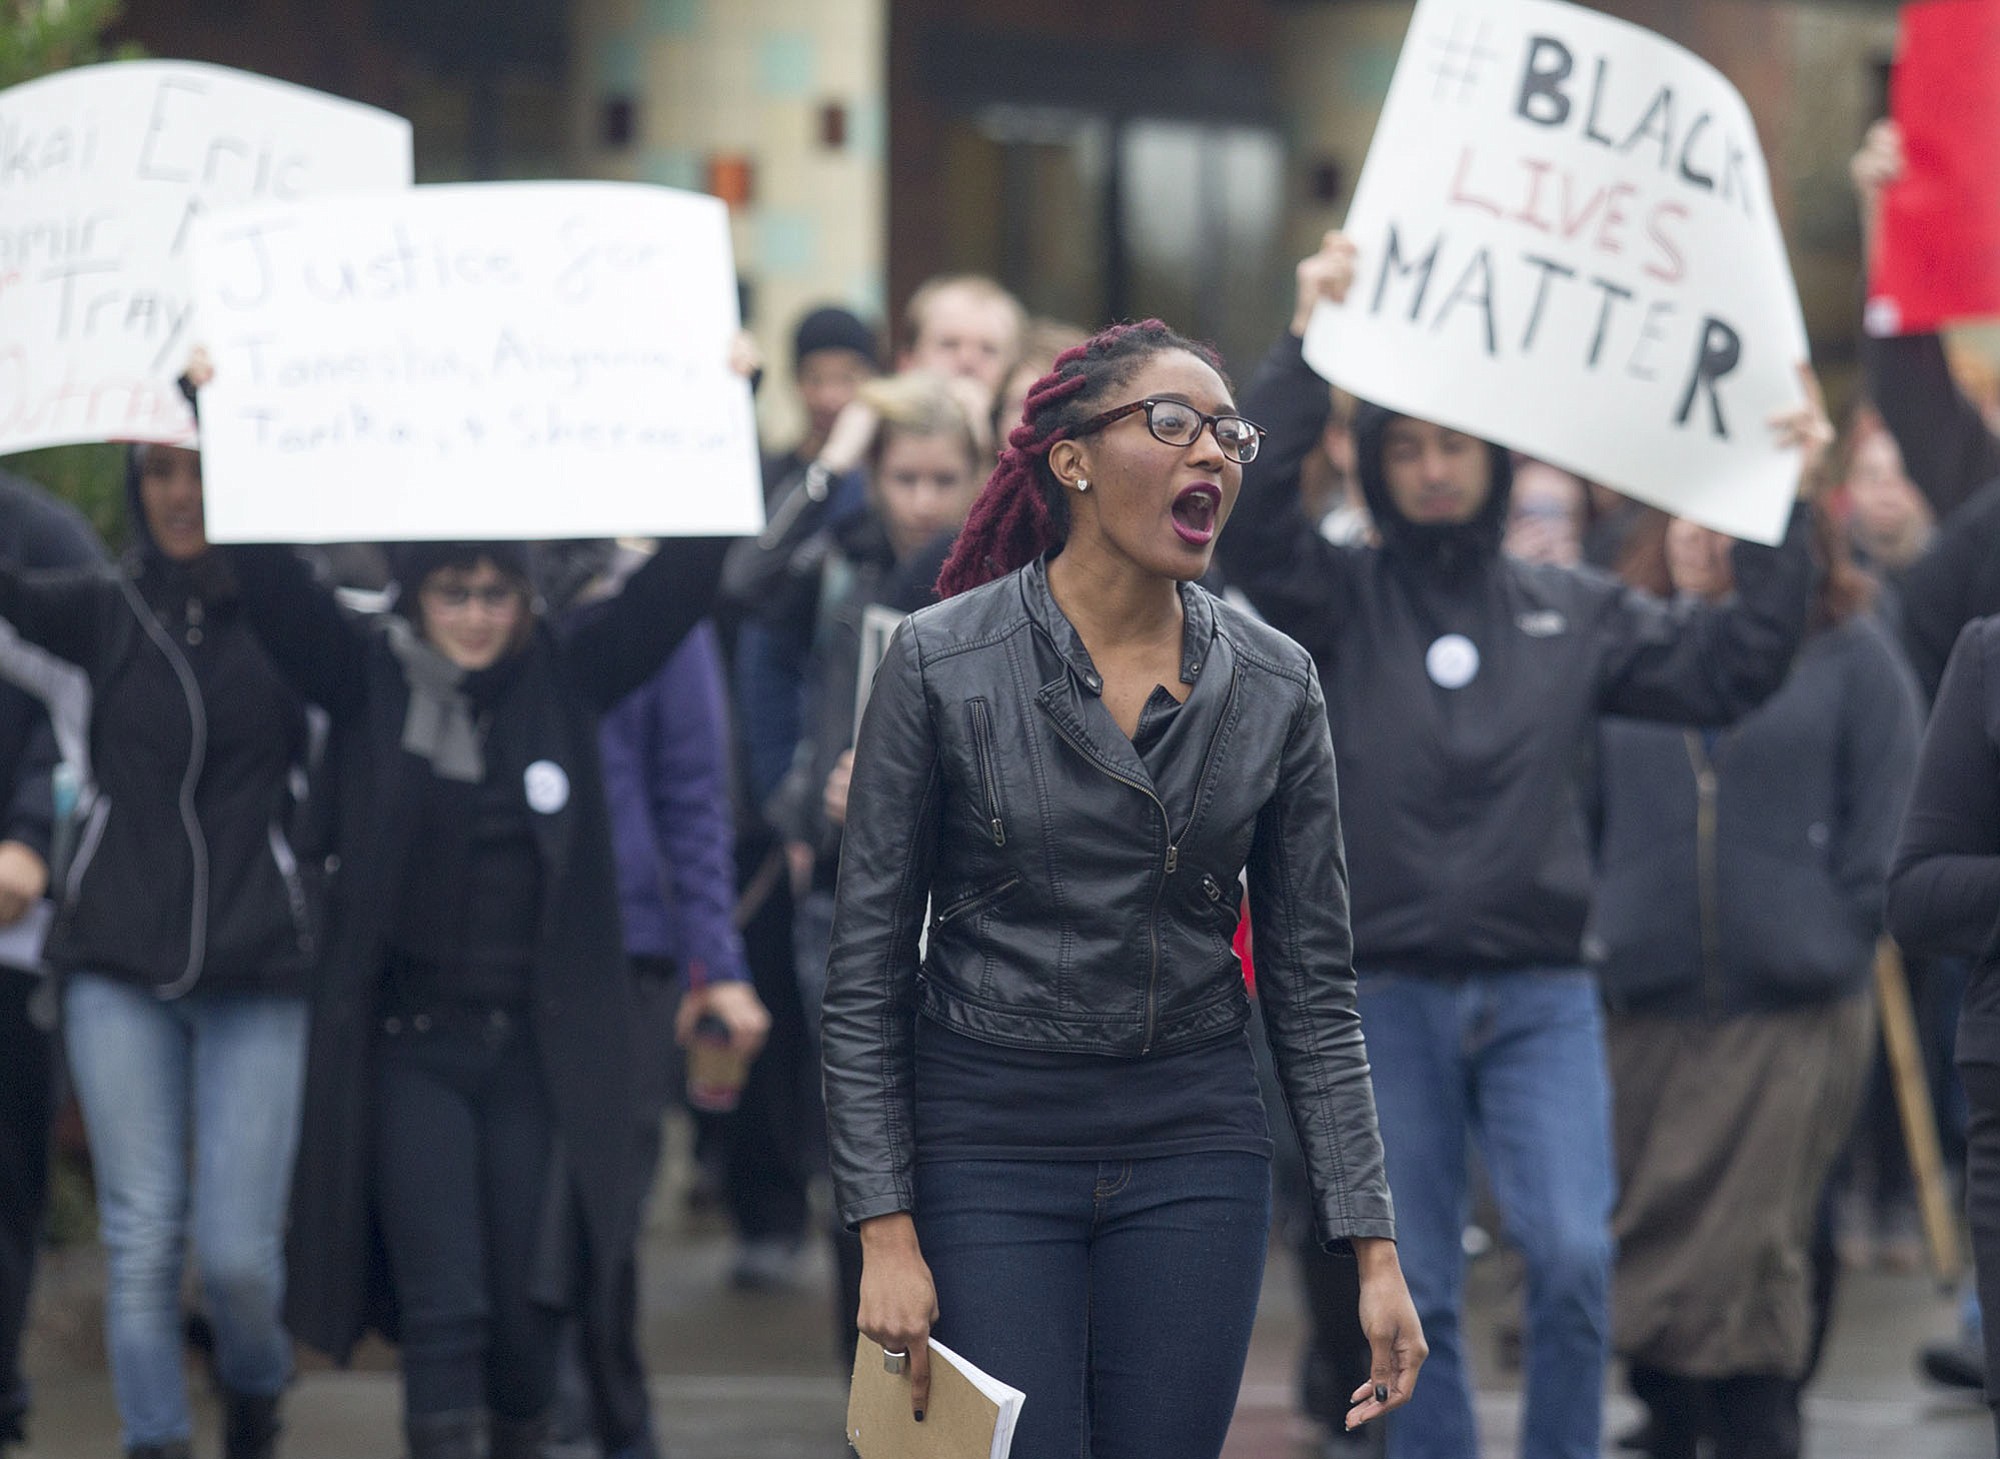 Student Cetara Davis leads a march held in response to the fatal police shooting of an unarmed black teen in Ferguson, Mo., and other similar cases around the nation on Wednesday at the Washington State Vancouver campus.